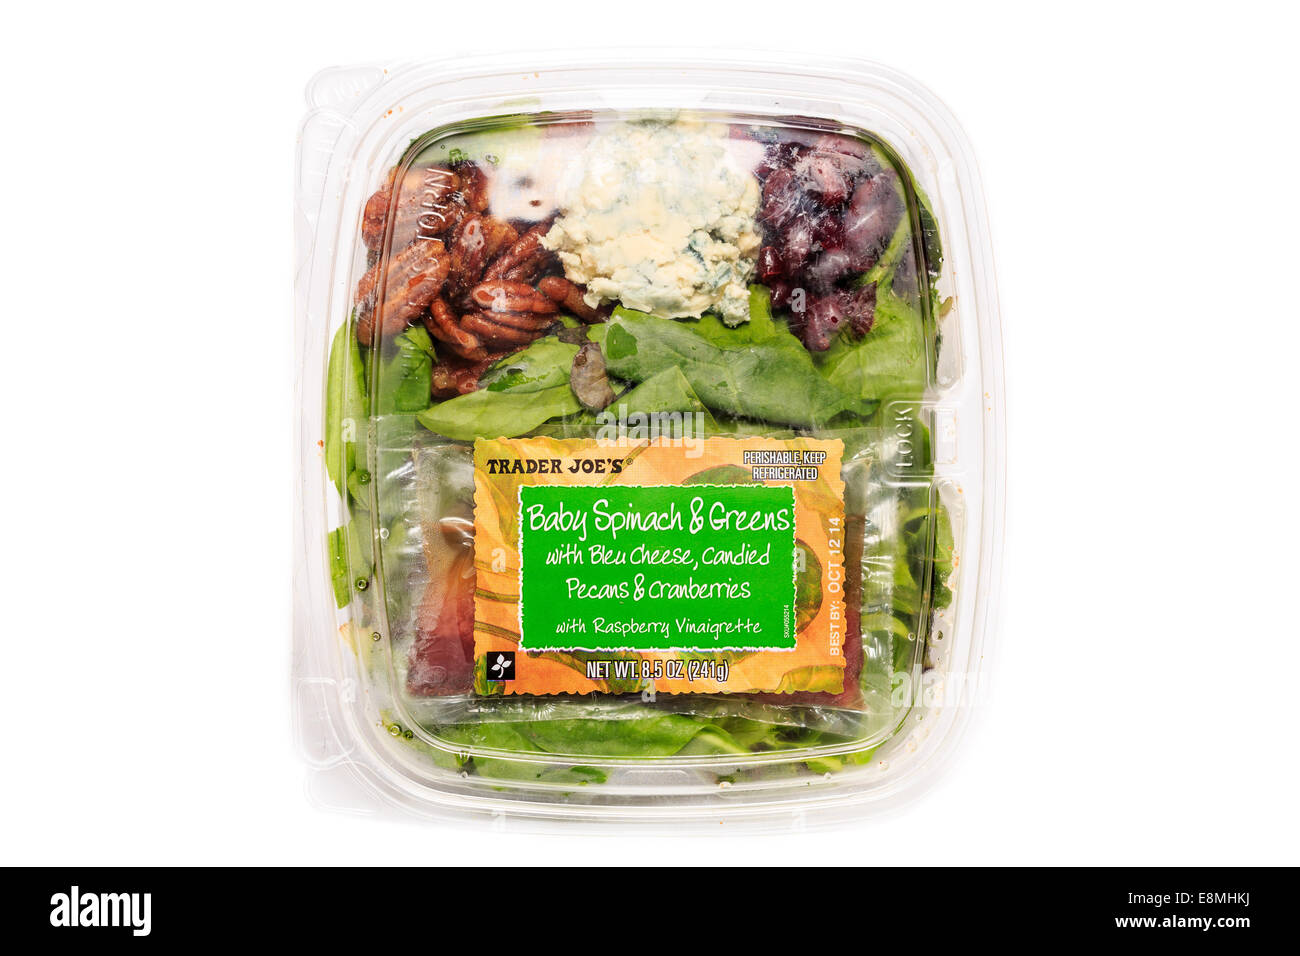 A package of ready to eat salad from Trader Joe's Market Stock Photo